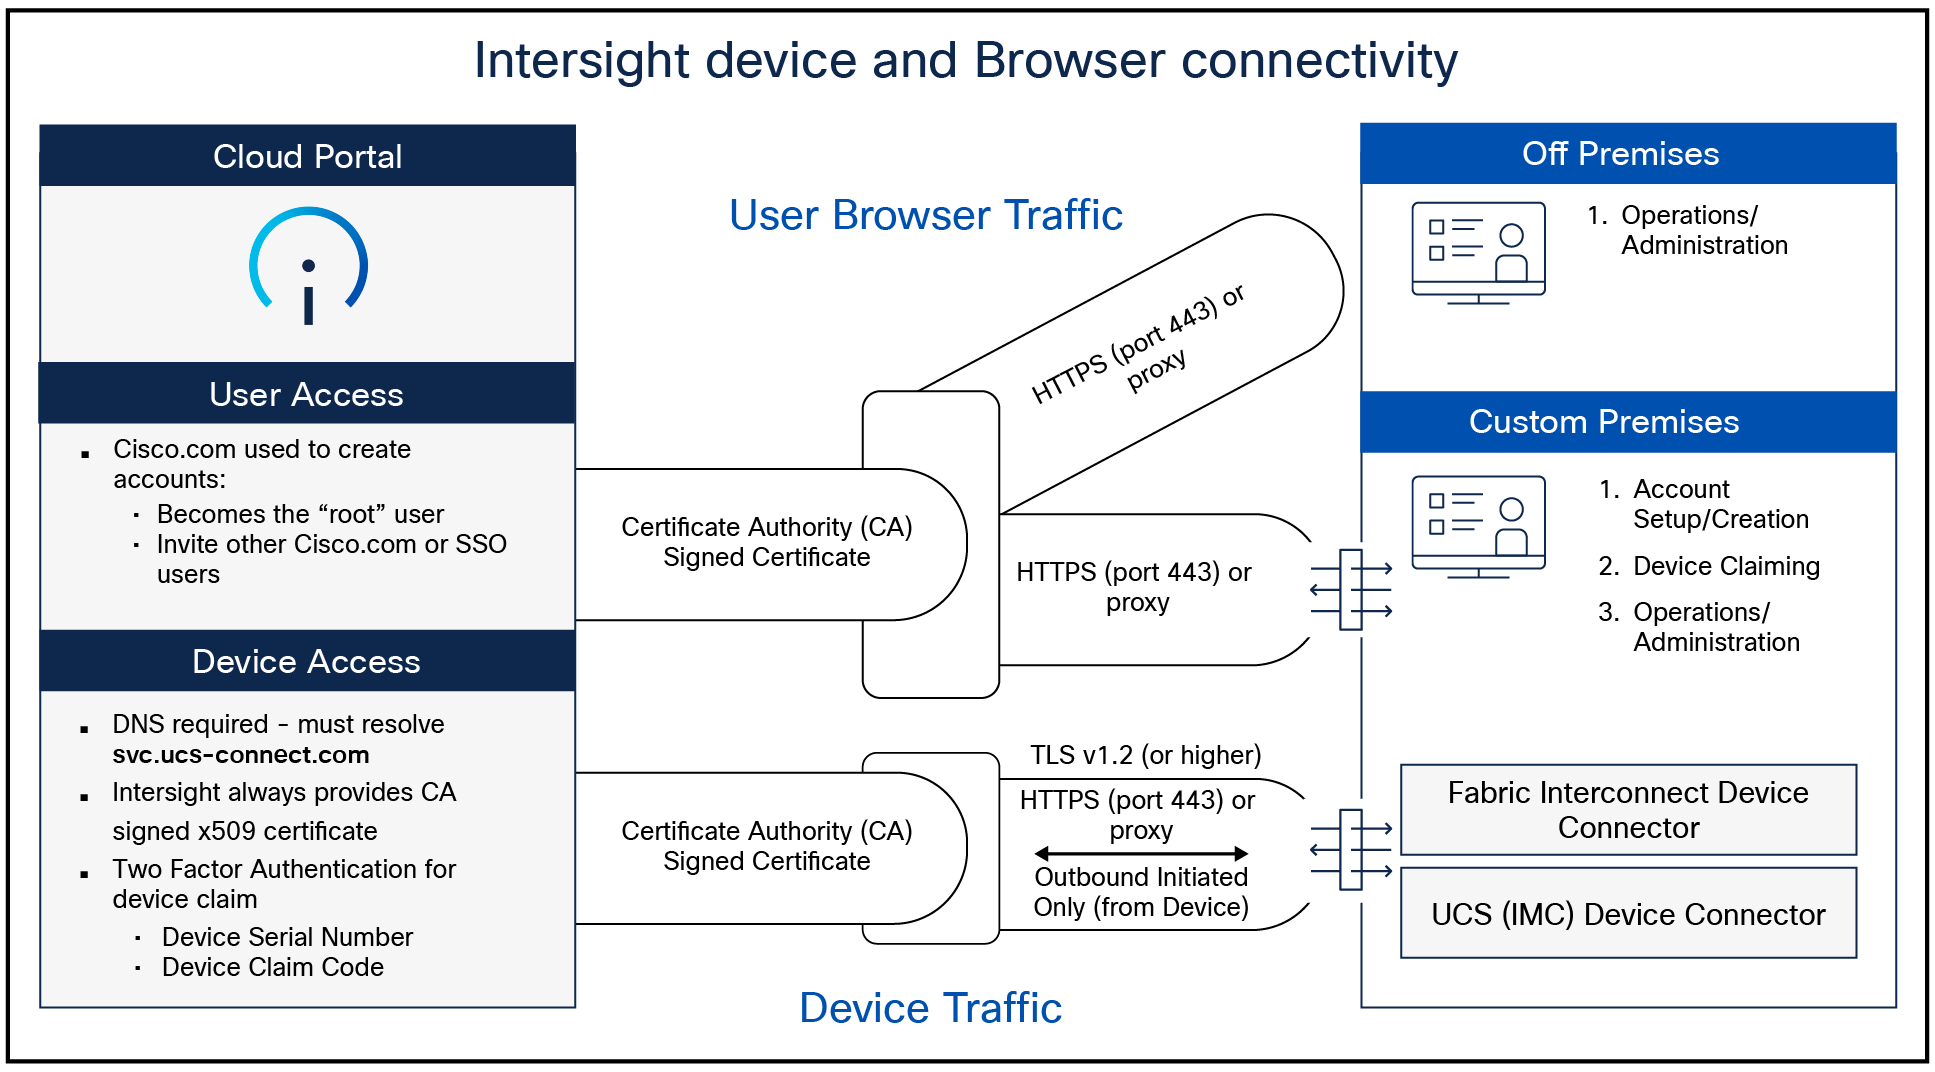 Connection to Intersight services with the Cisco UCS device connector